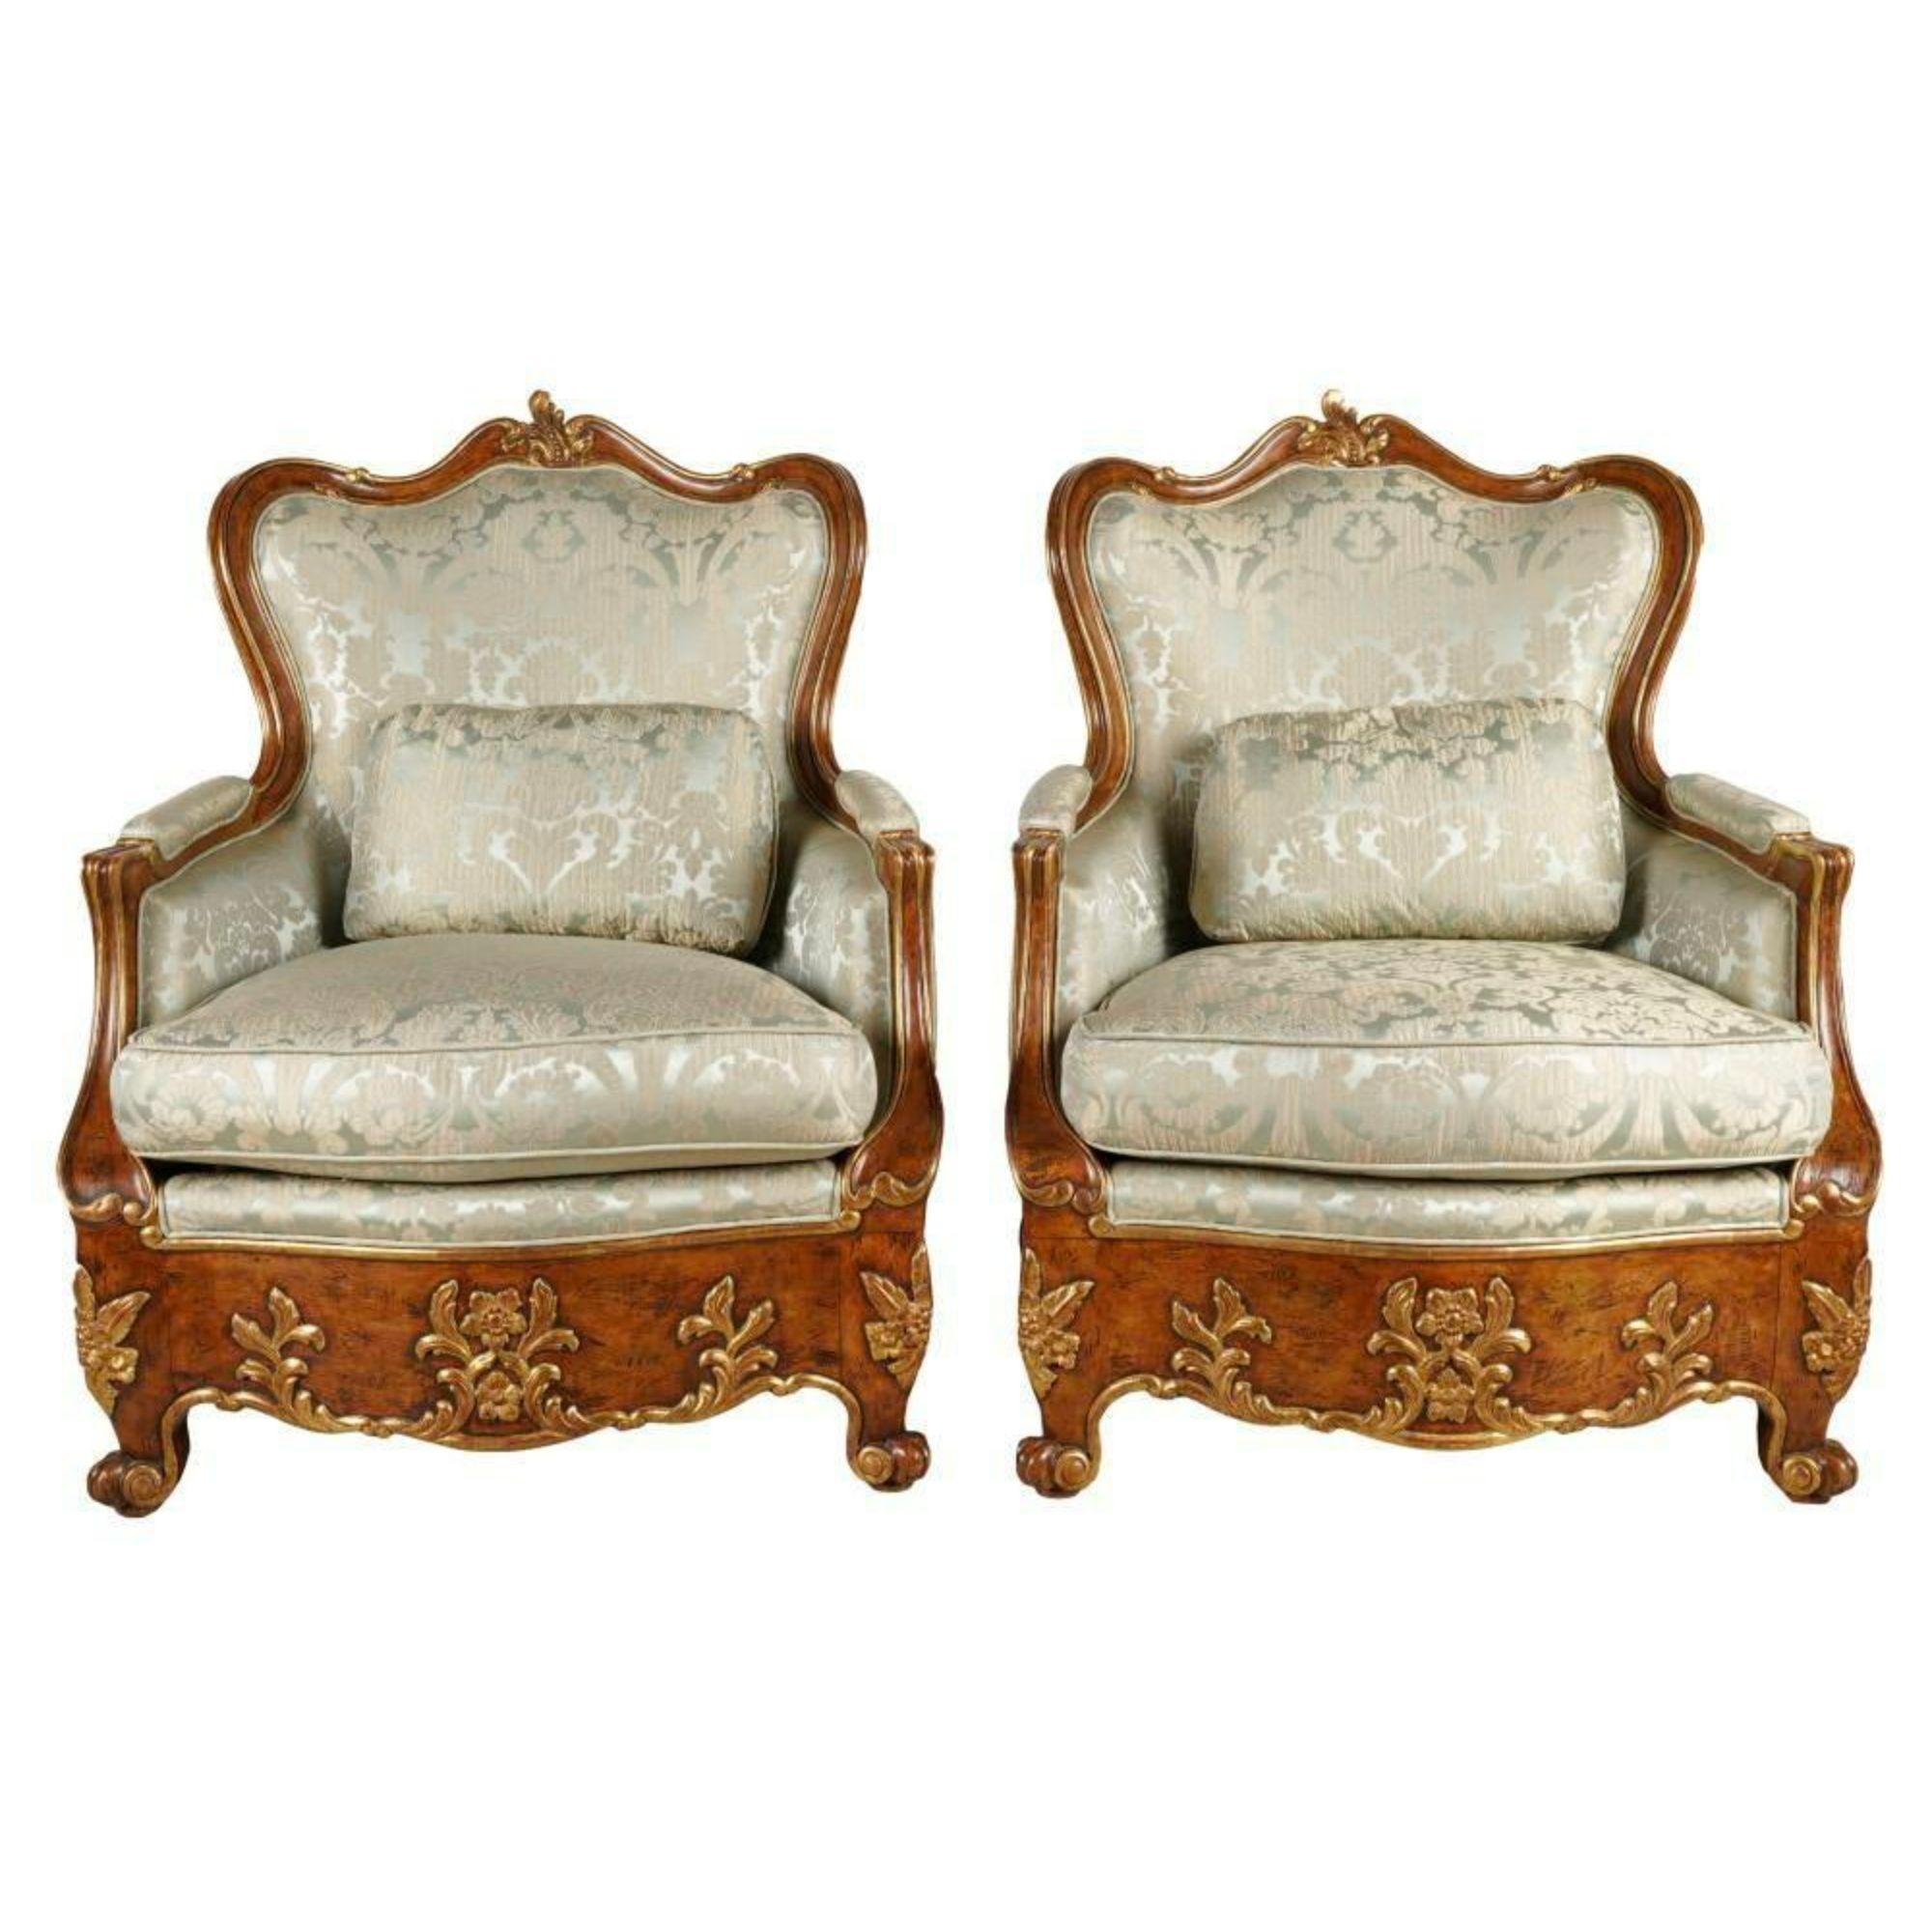 Pair of 19th c style Italian Charles Pollock for William Switzer bergere chairs. These are called the medeci chair by Charles Pollock. Each upholstered in silk damask and feature super comfortable down cushions

Additional information: